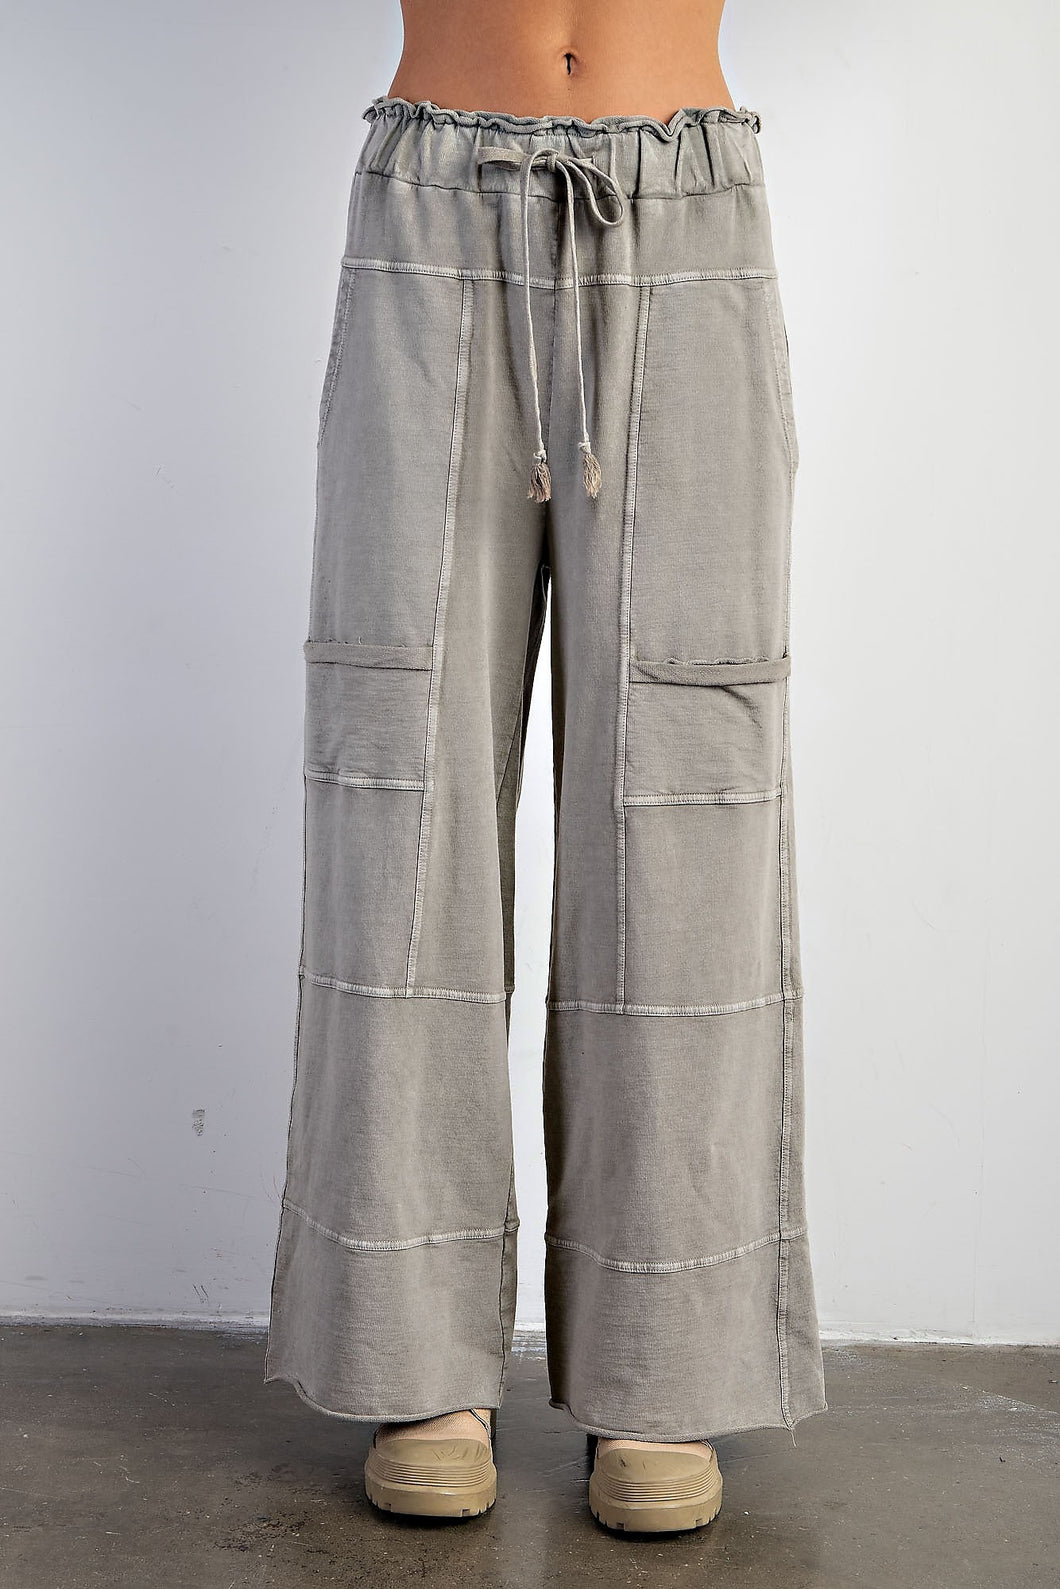 Easel Mineral Washed Terry Knit Pants in Olive Grey Pants Easel   